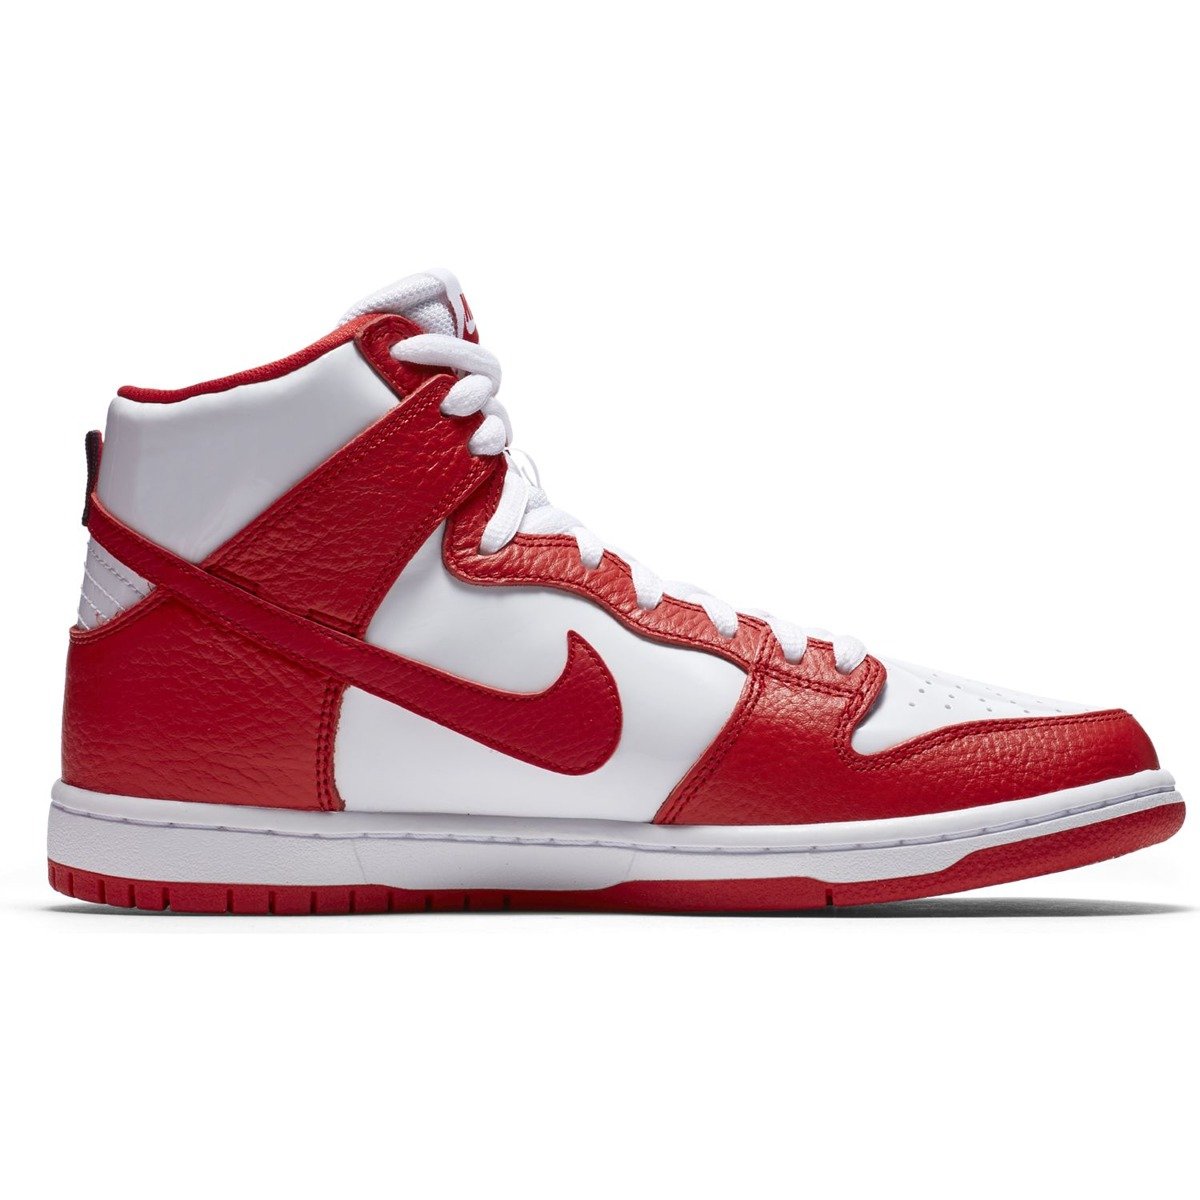 red and white nike sb dunks